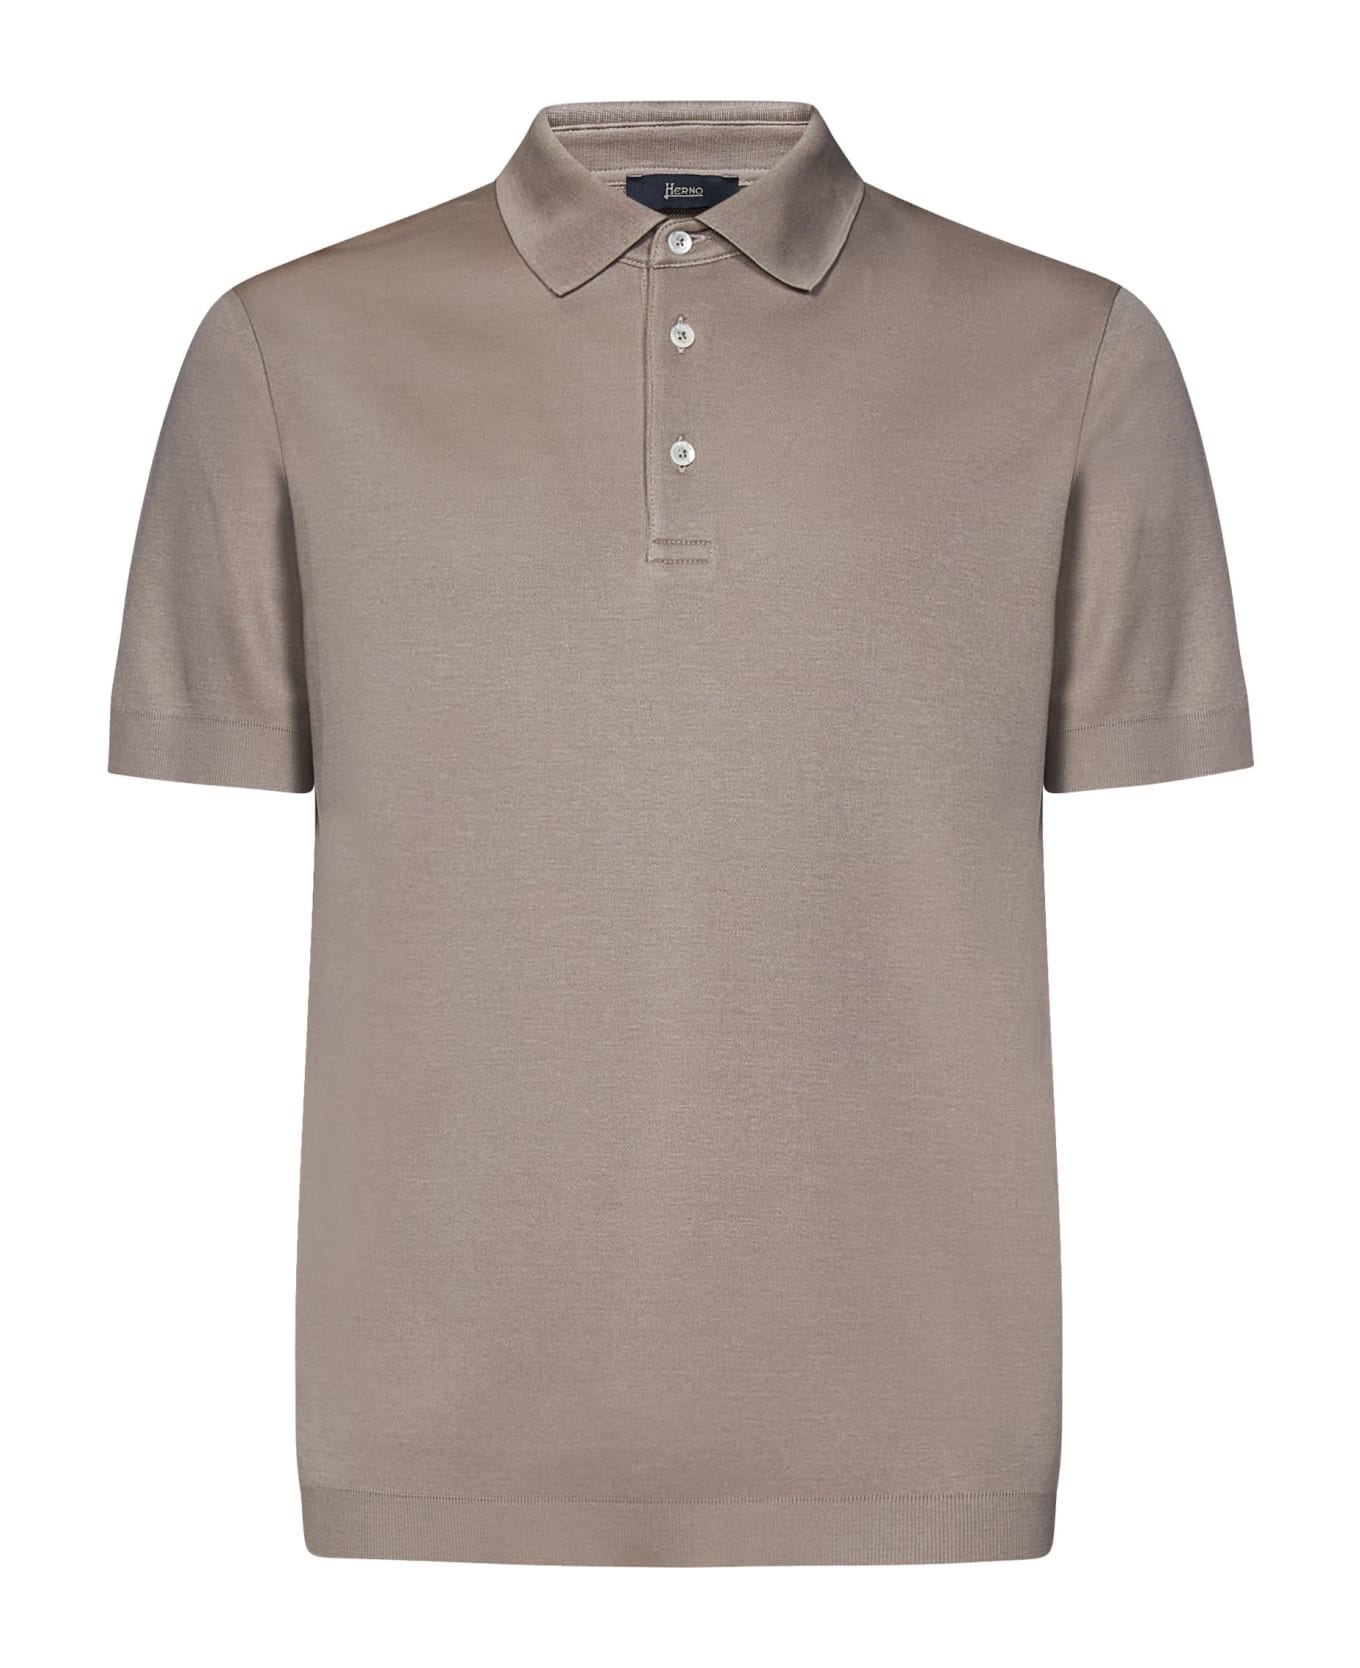 Herno Polo Shirt - Beige ポロシャツ